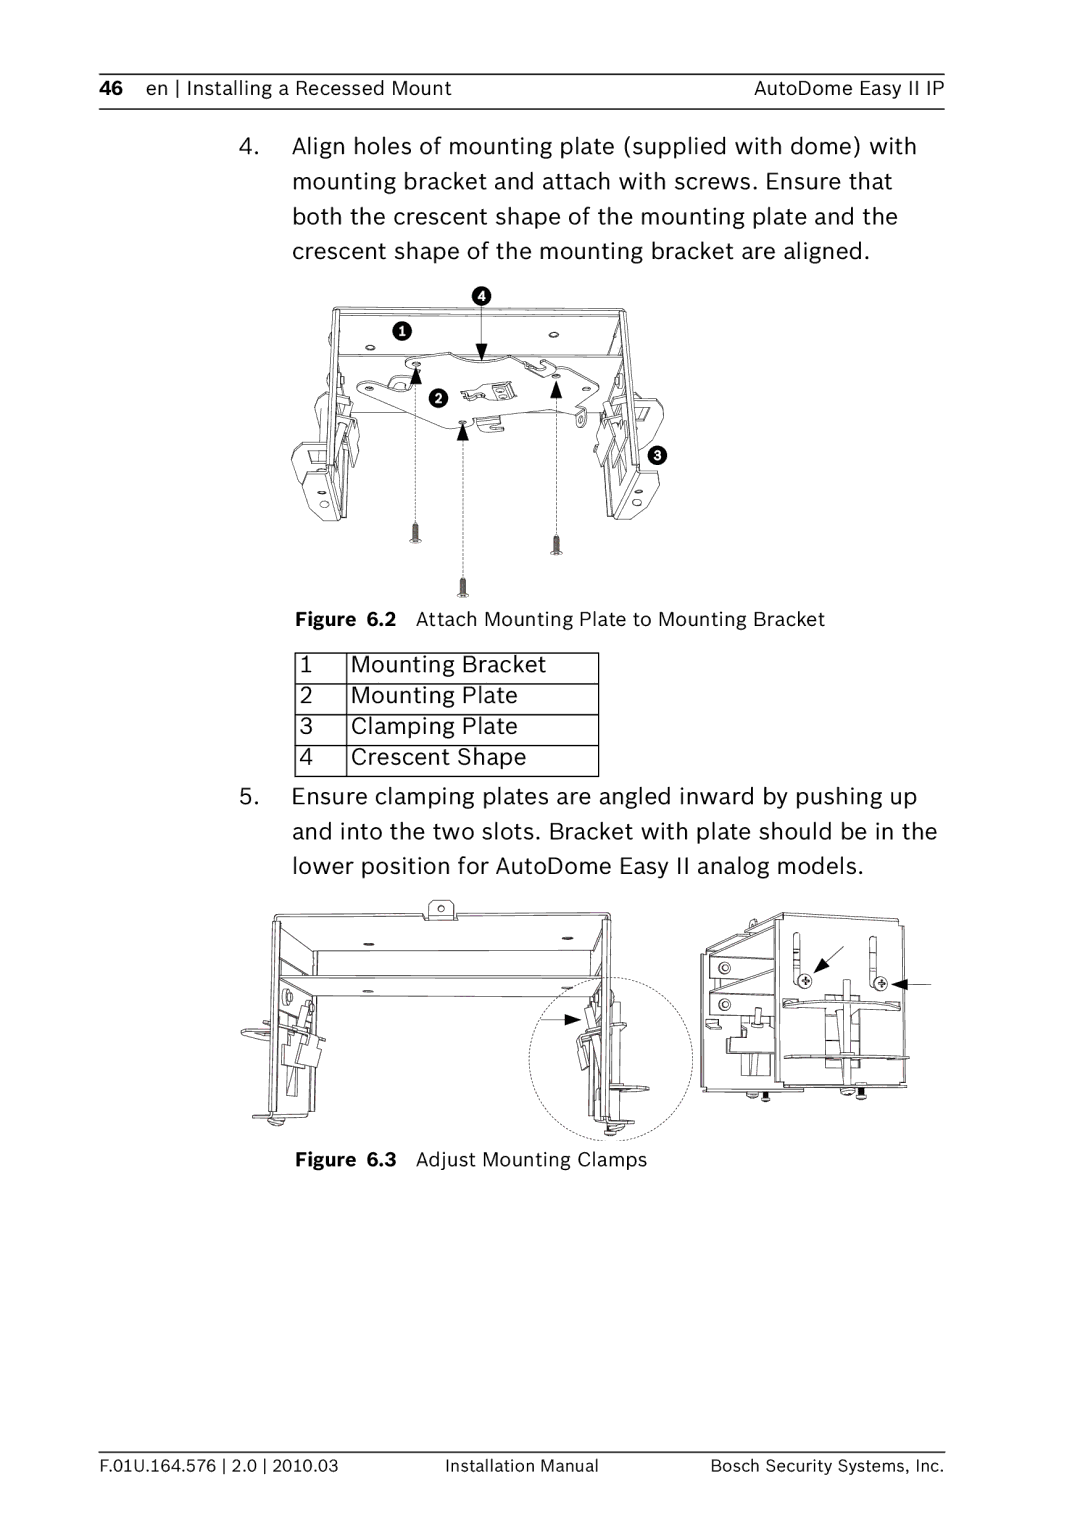 Bosch Appliances VEZ installation manual Attach Mounting Plate to Mounting Bracket 